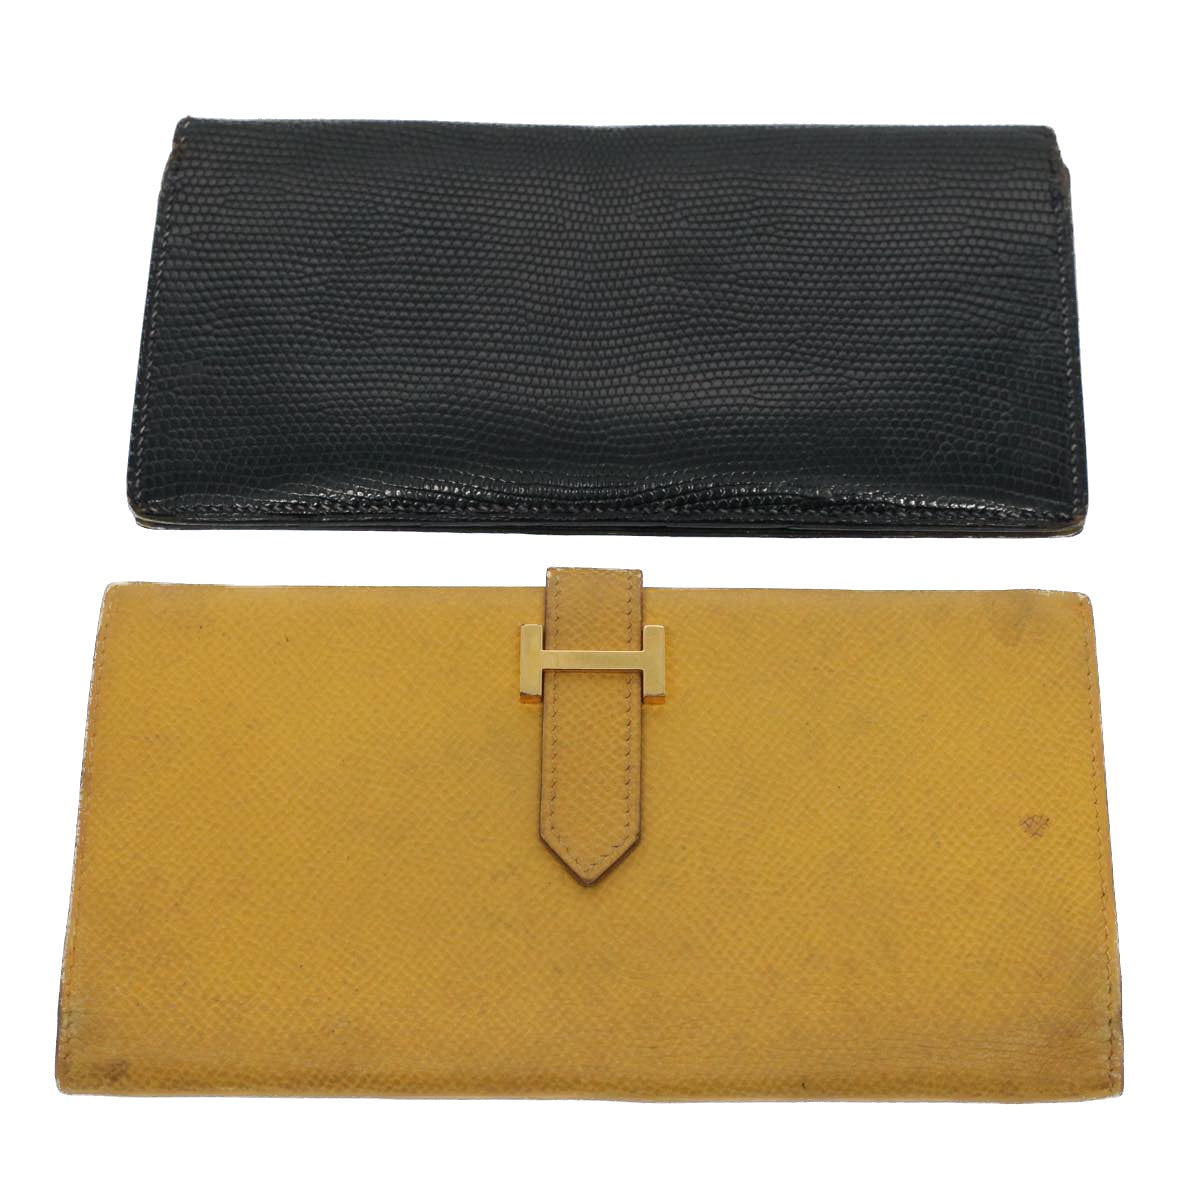 HERMES Wallet Leather 2Set Black Yellow Auth bs8519